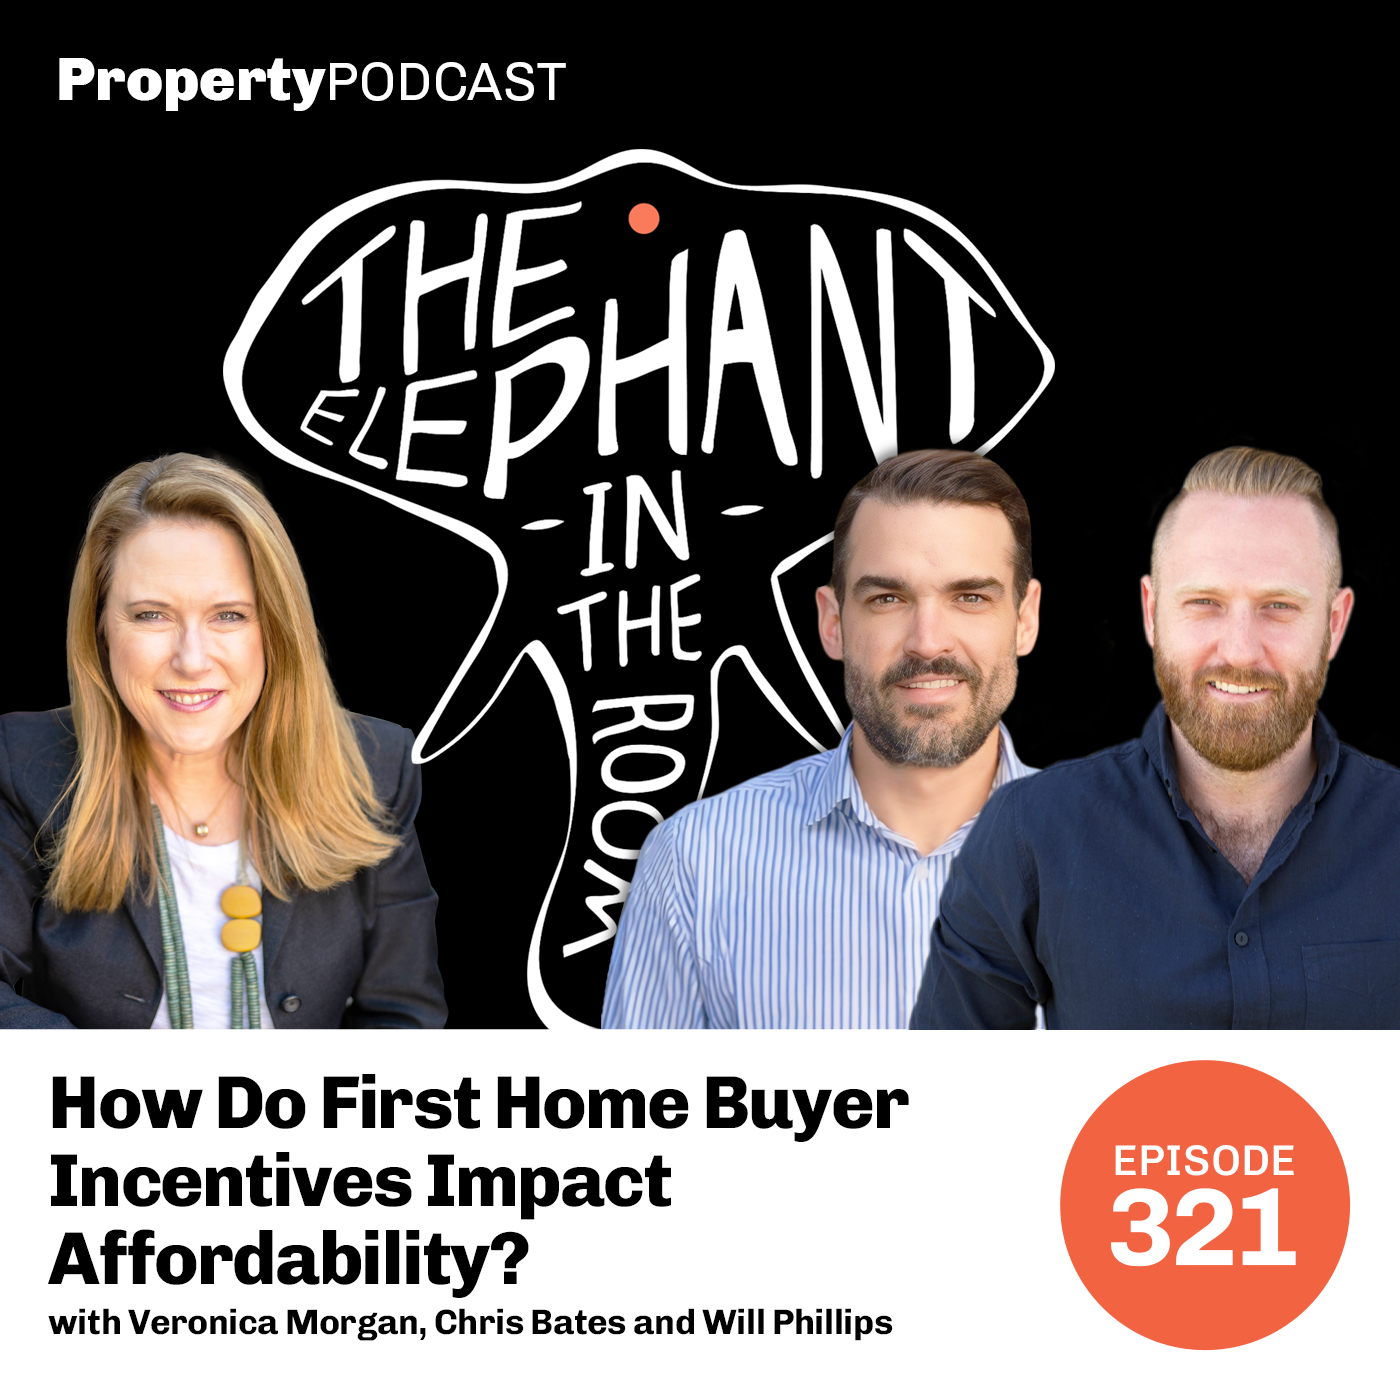 How Do First Home Buyer Incentives Impact Affordability?